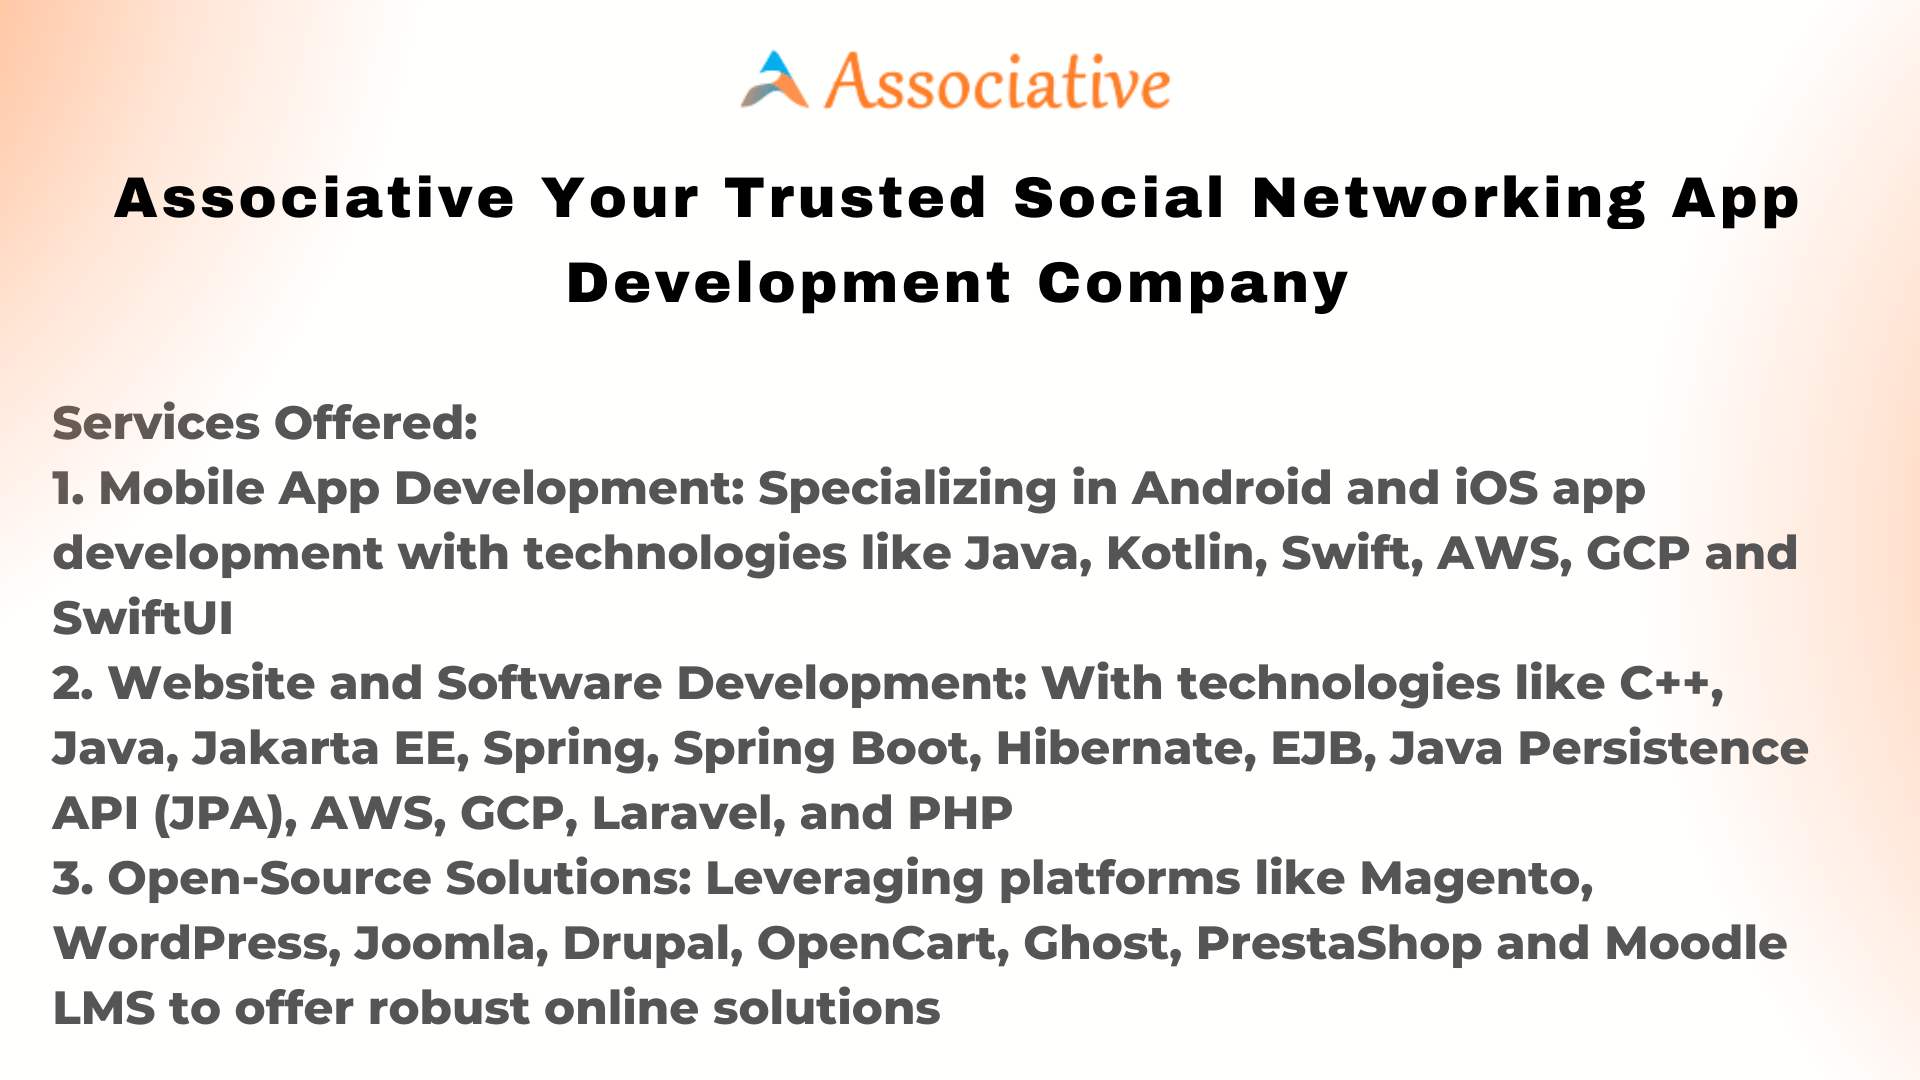 Associative Your Trusted Social Networking App Development Company